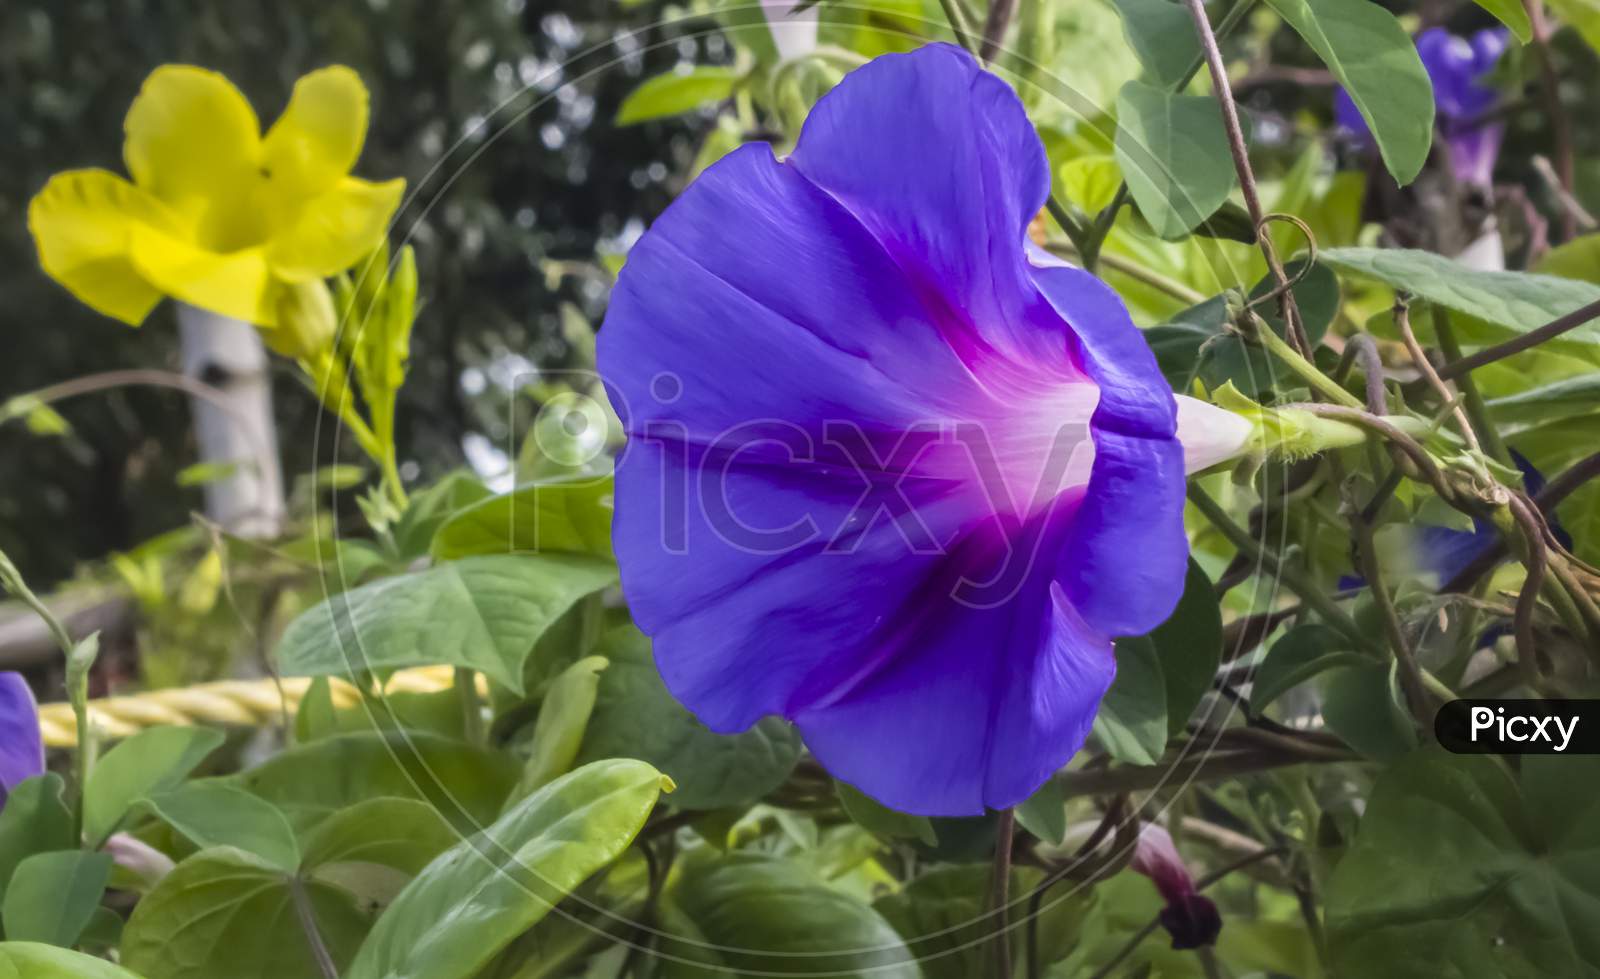 Close up phtgrpah of a Blue morning glory flower